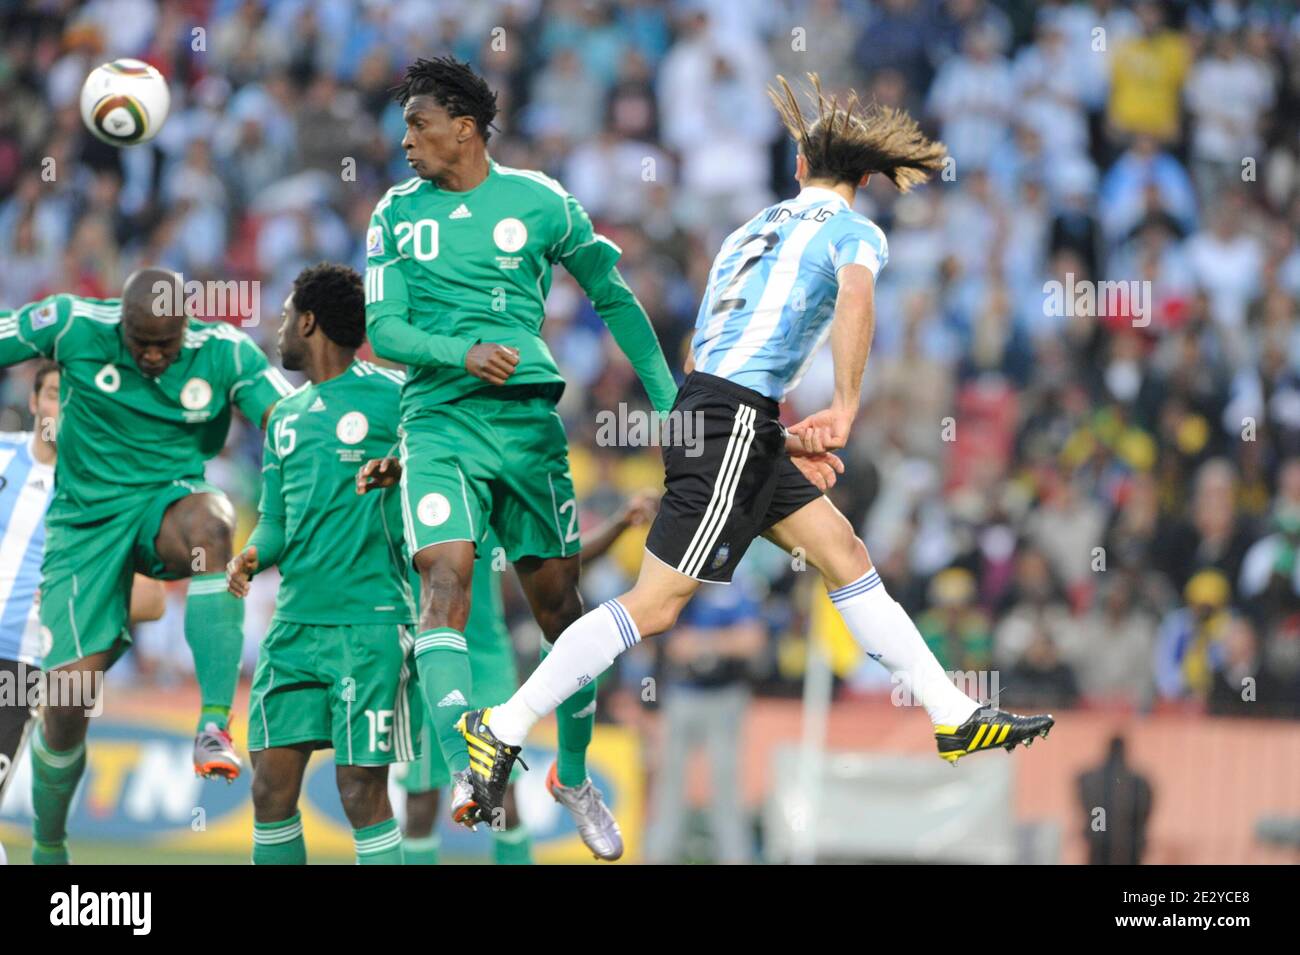 Argentina's Martin Demichelis battling Nigeria's Dickson Etuhu during the 2010 FIFA World Cup South Africa Soccer match, group B, Argentina vs Nigeria at Ellis Stadium in Johannesburg, South Africa on June 12, 2010. Argentina won 1-0. Photo by Henri Szwarc/ABACAPRESS.COM Stock Photo